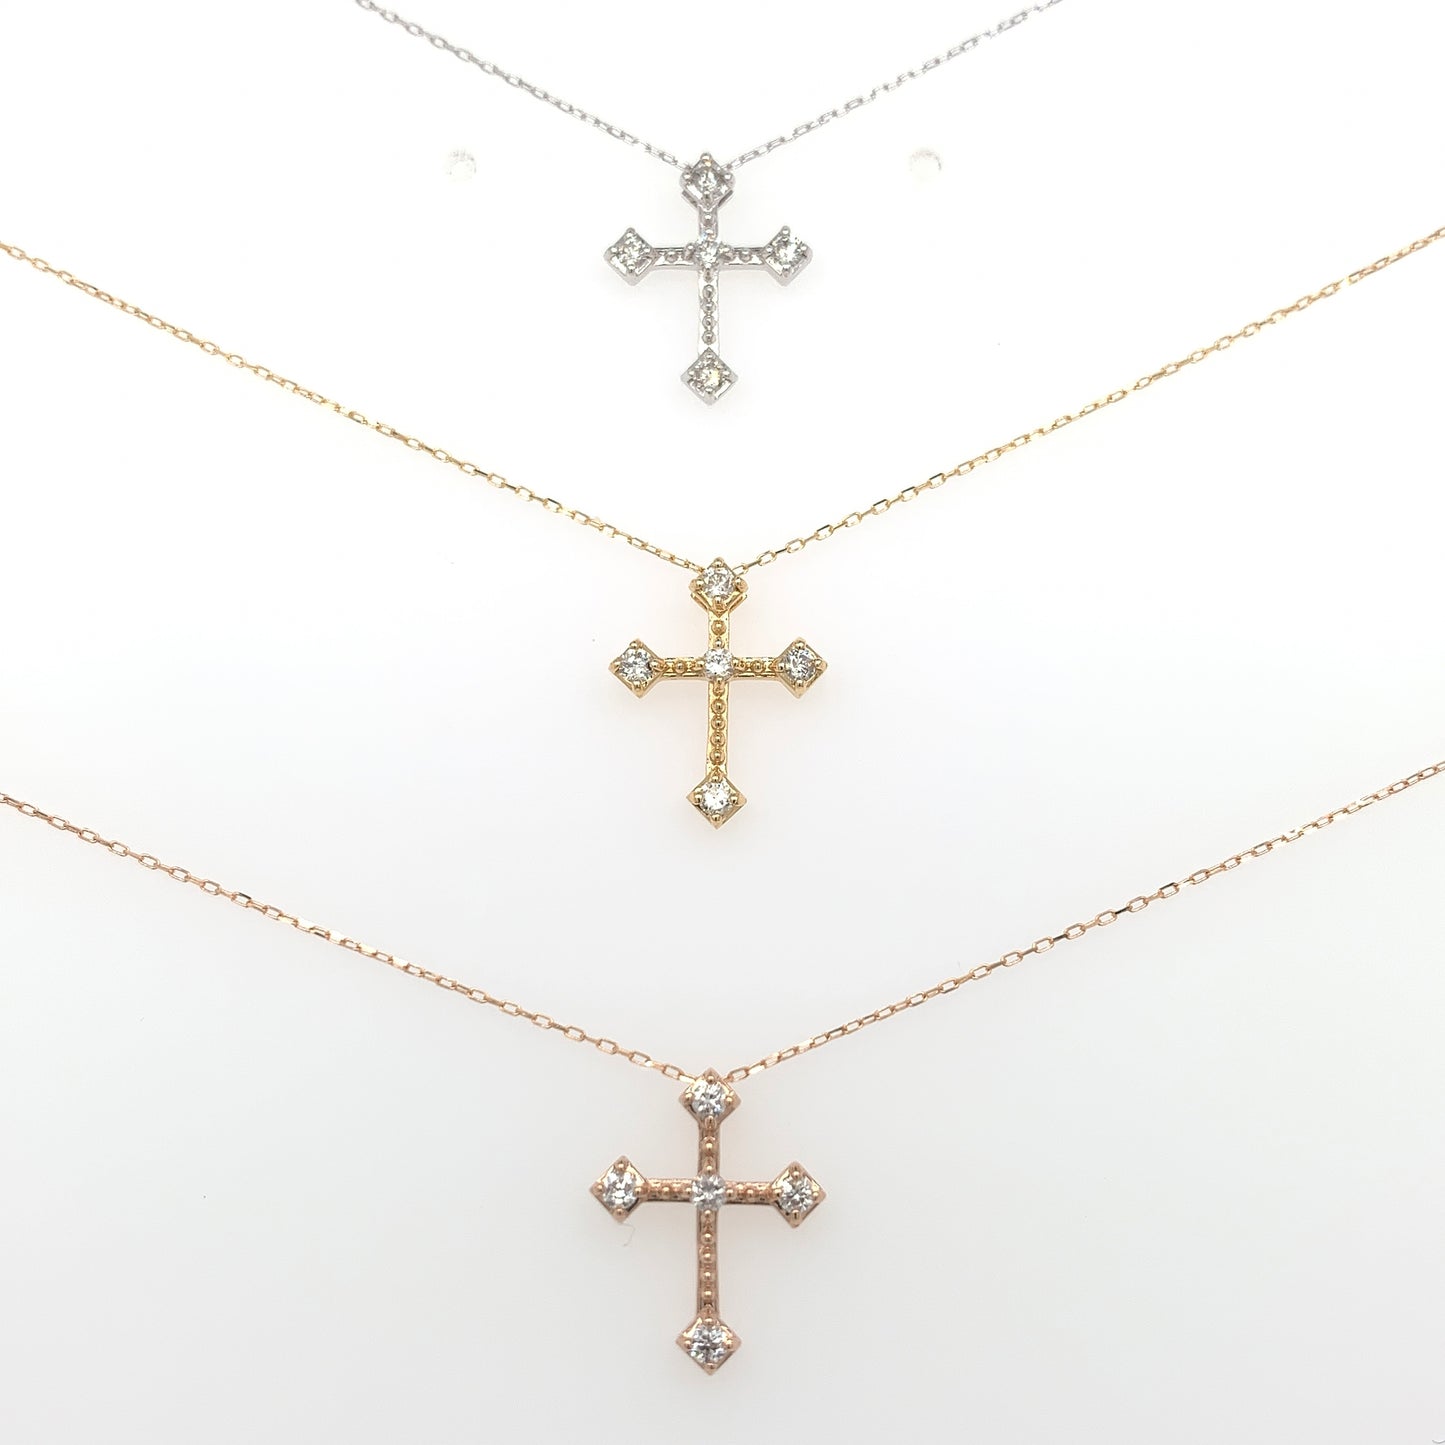 Four pointed Cross Necklace 0.1ct